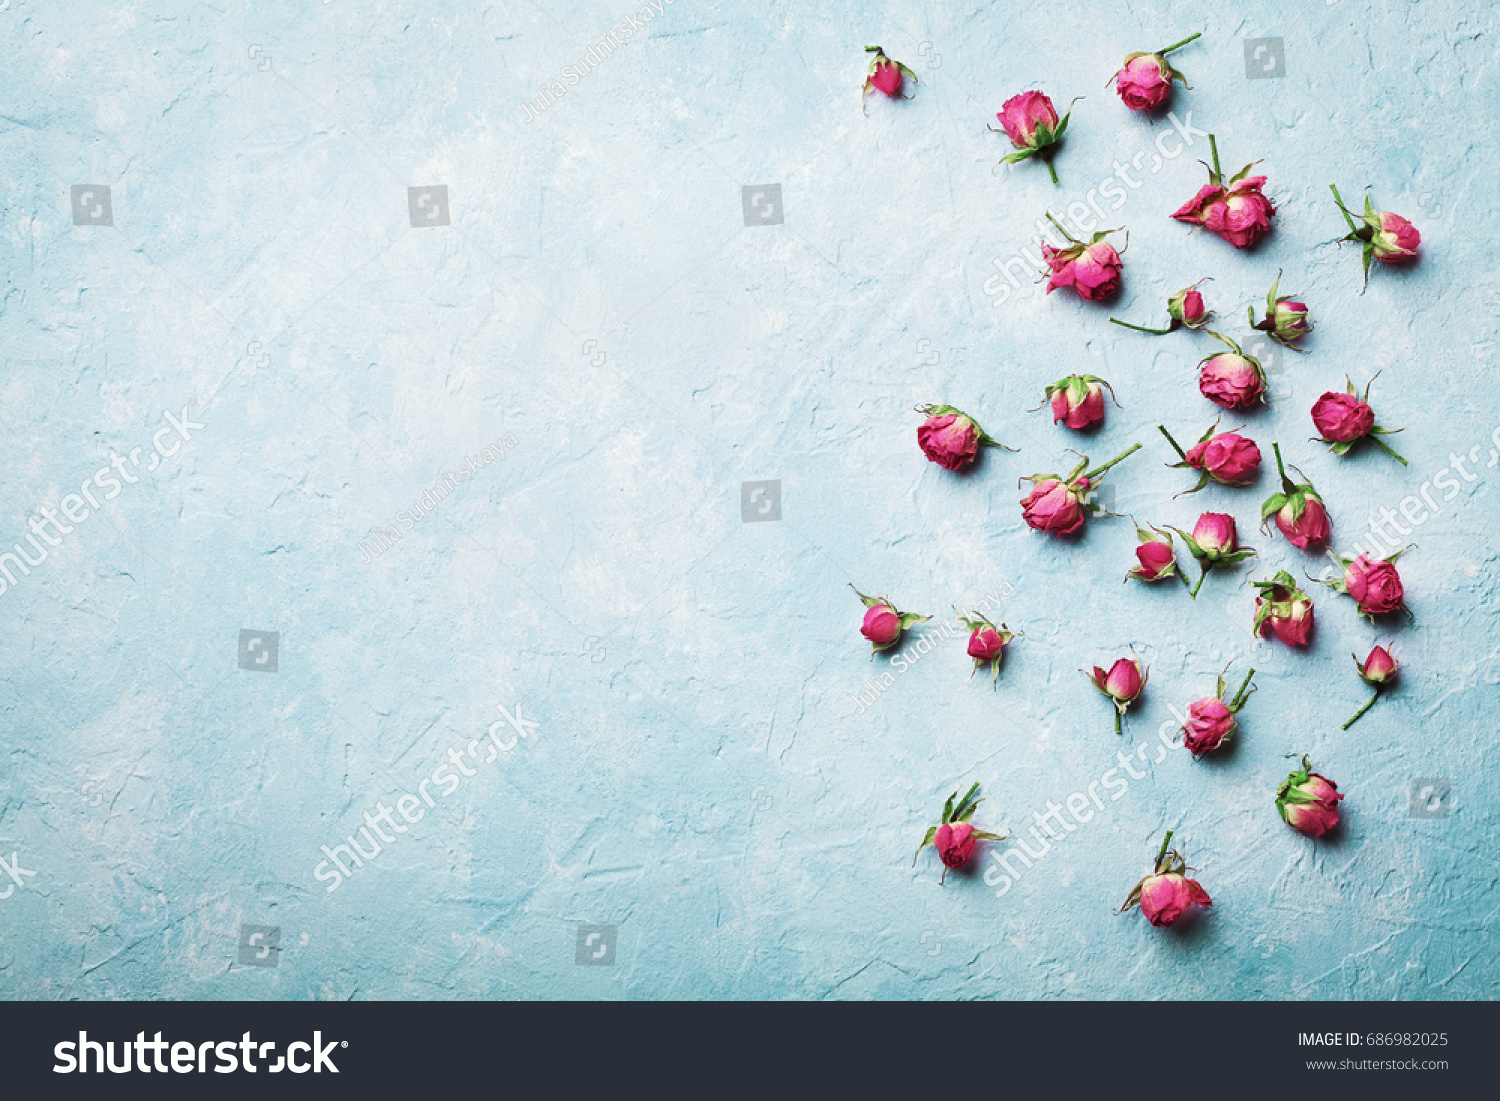 Pink rose flowers on blue vintage table top view in flat lay style.  #686982025